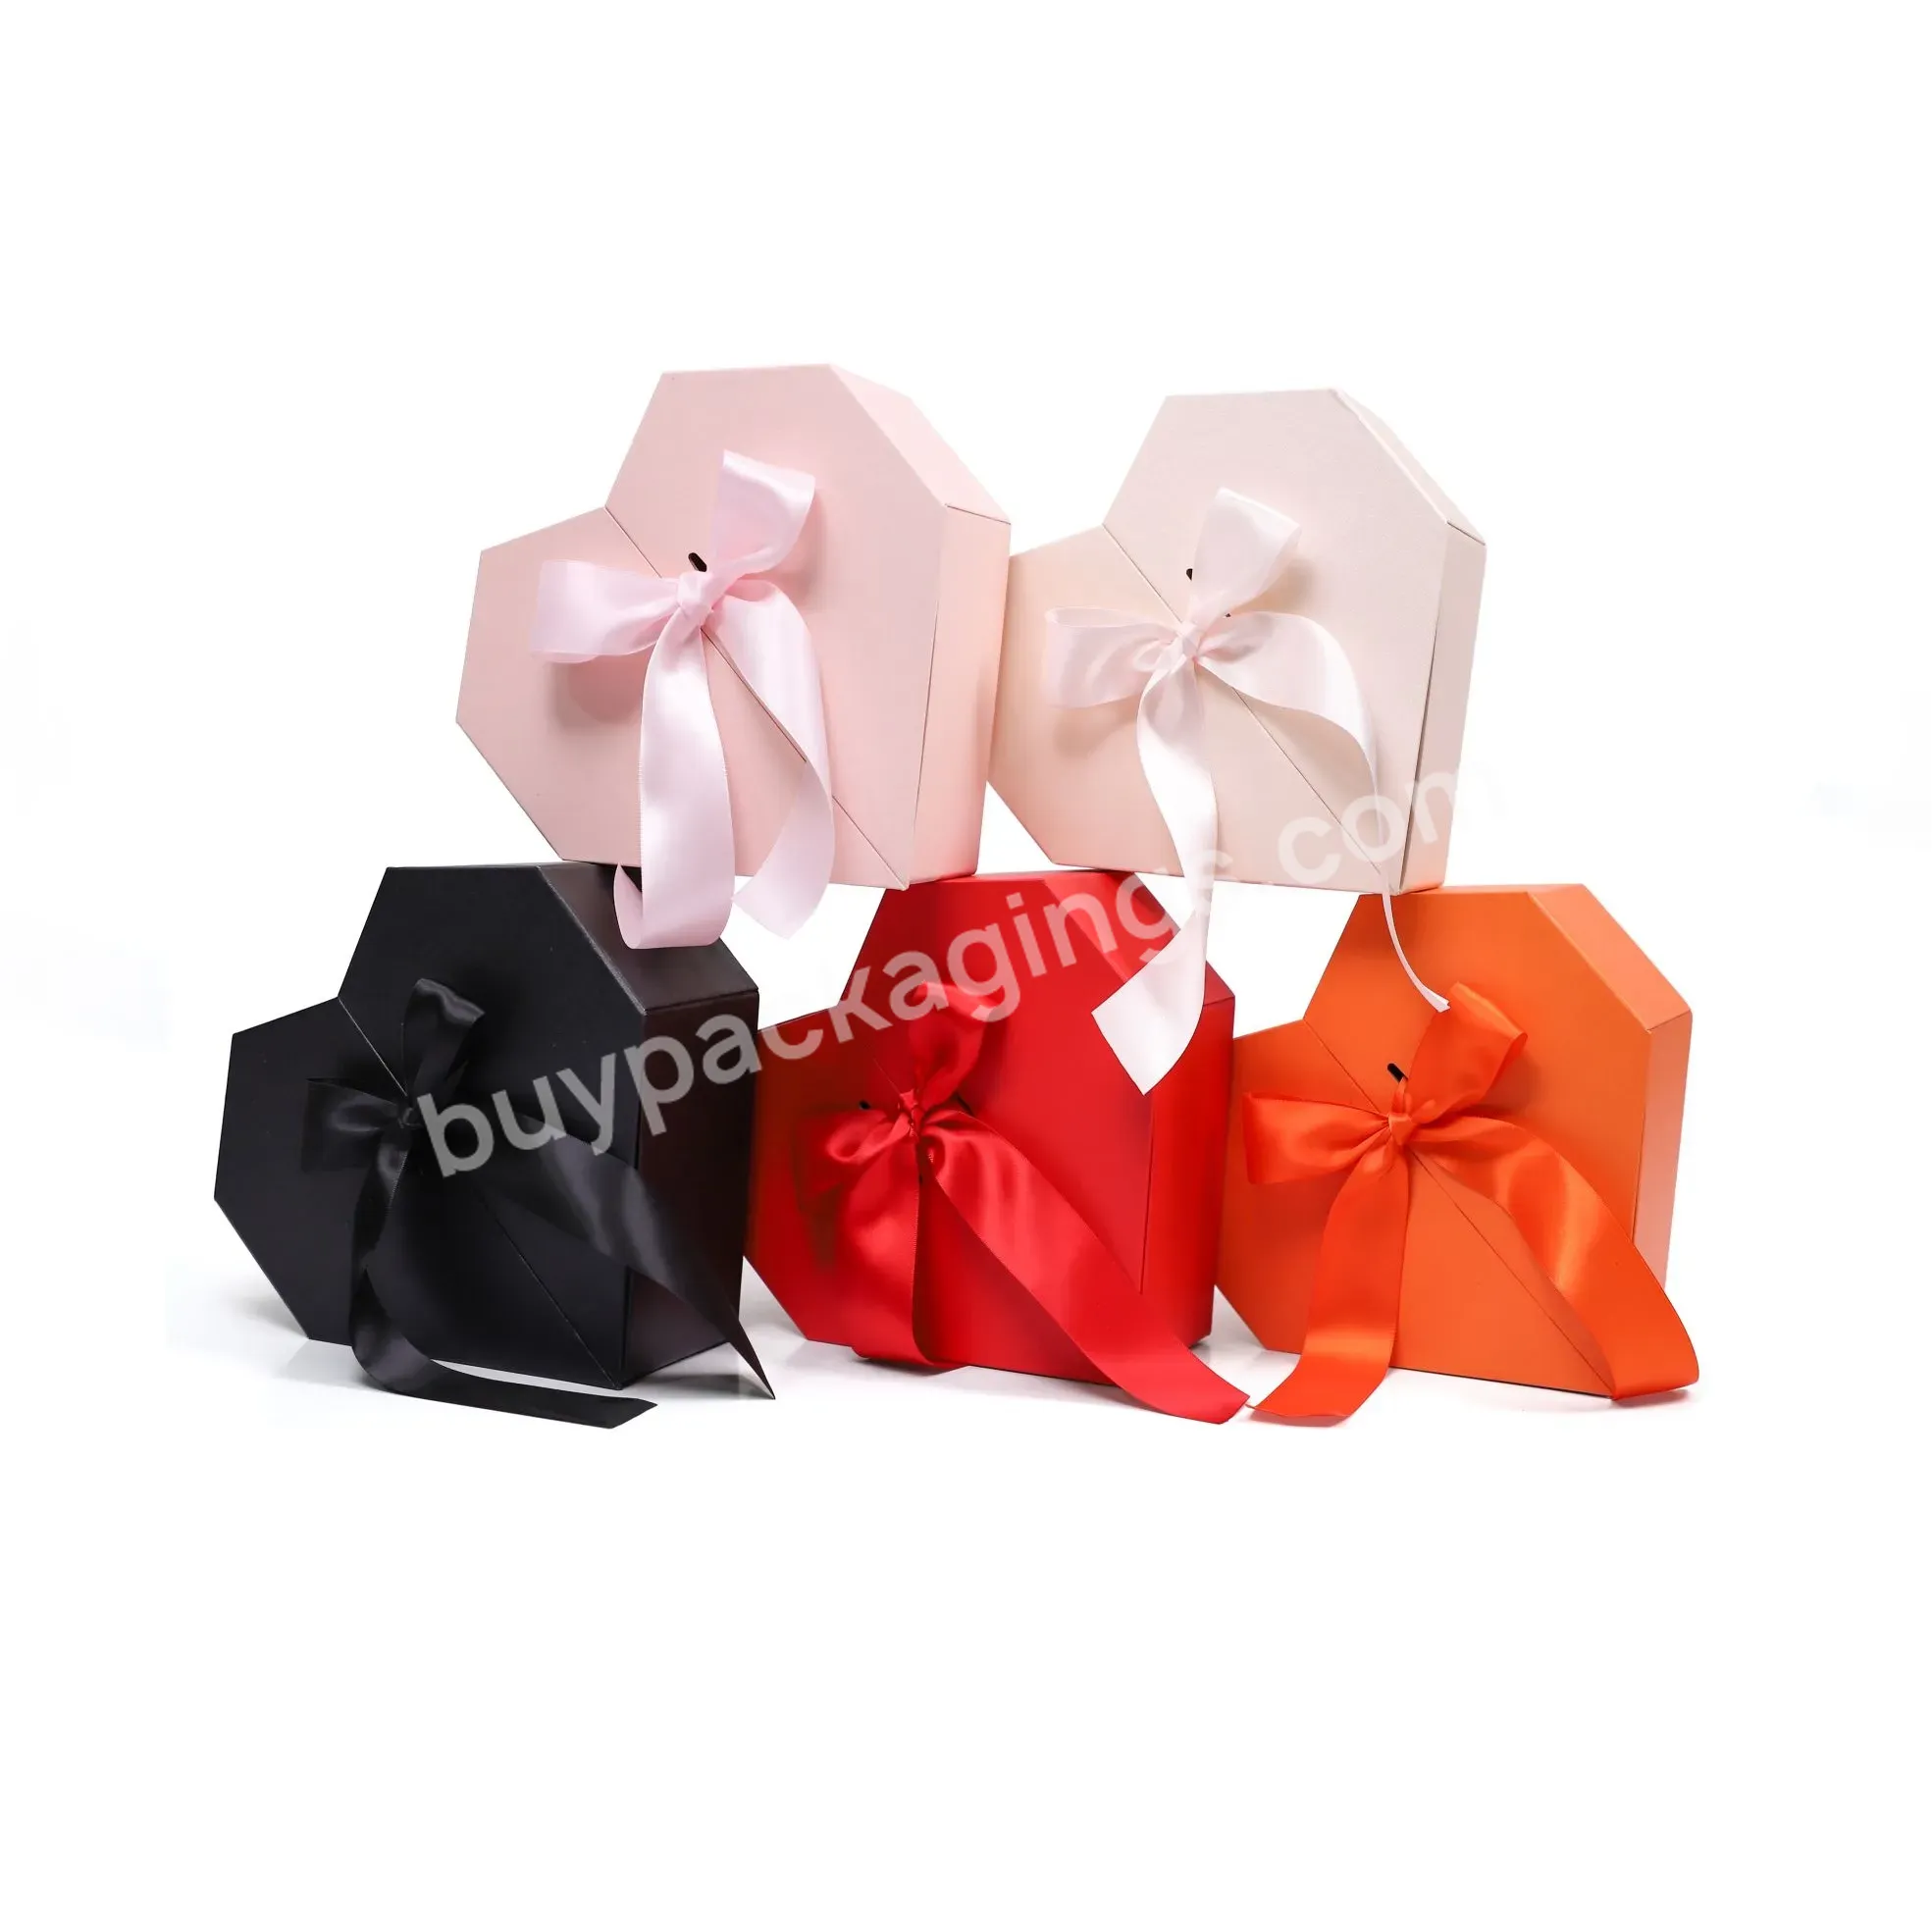 2021 New Design Heart Song Flower Gift Box With Hinged Door Cover Ribbon Bow Lock - Buy Heart Song Flower Gift Box,Rose Flower Gift Box,Gift Box With Hinged Door Cover Ribbon Bow Lock.